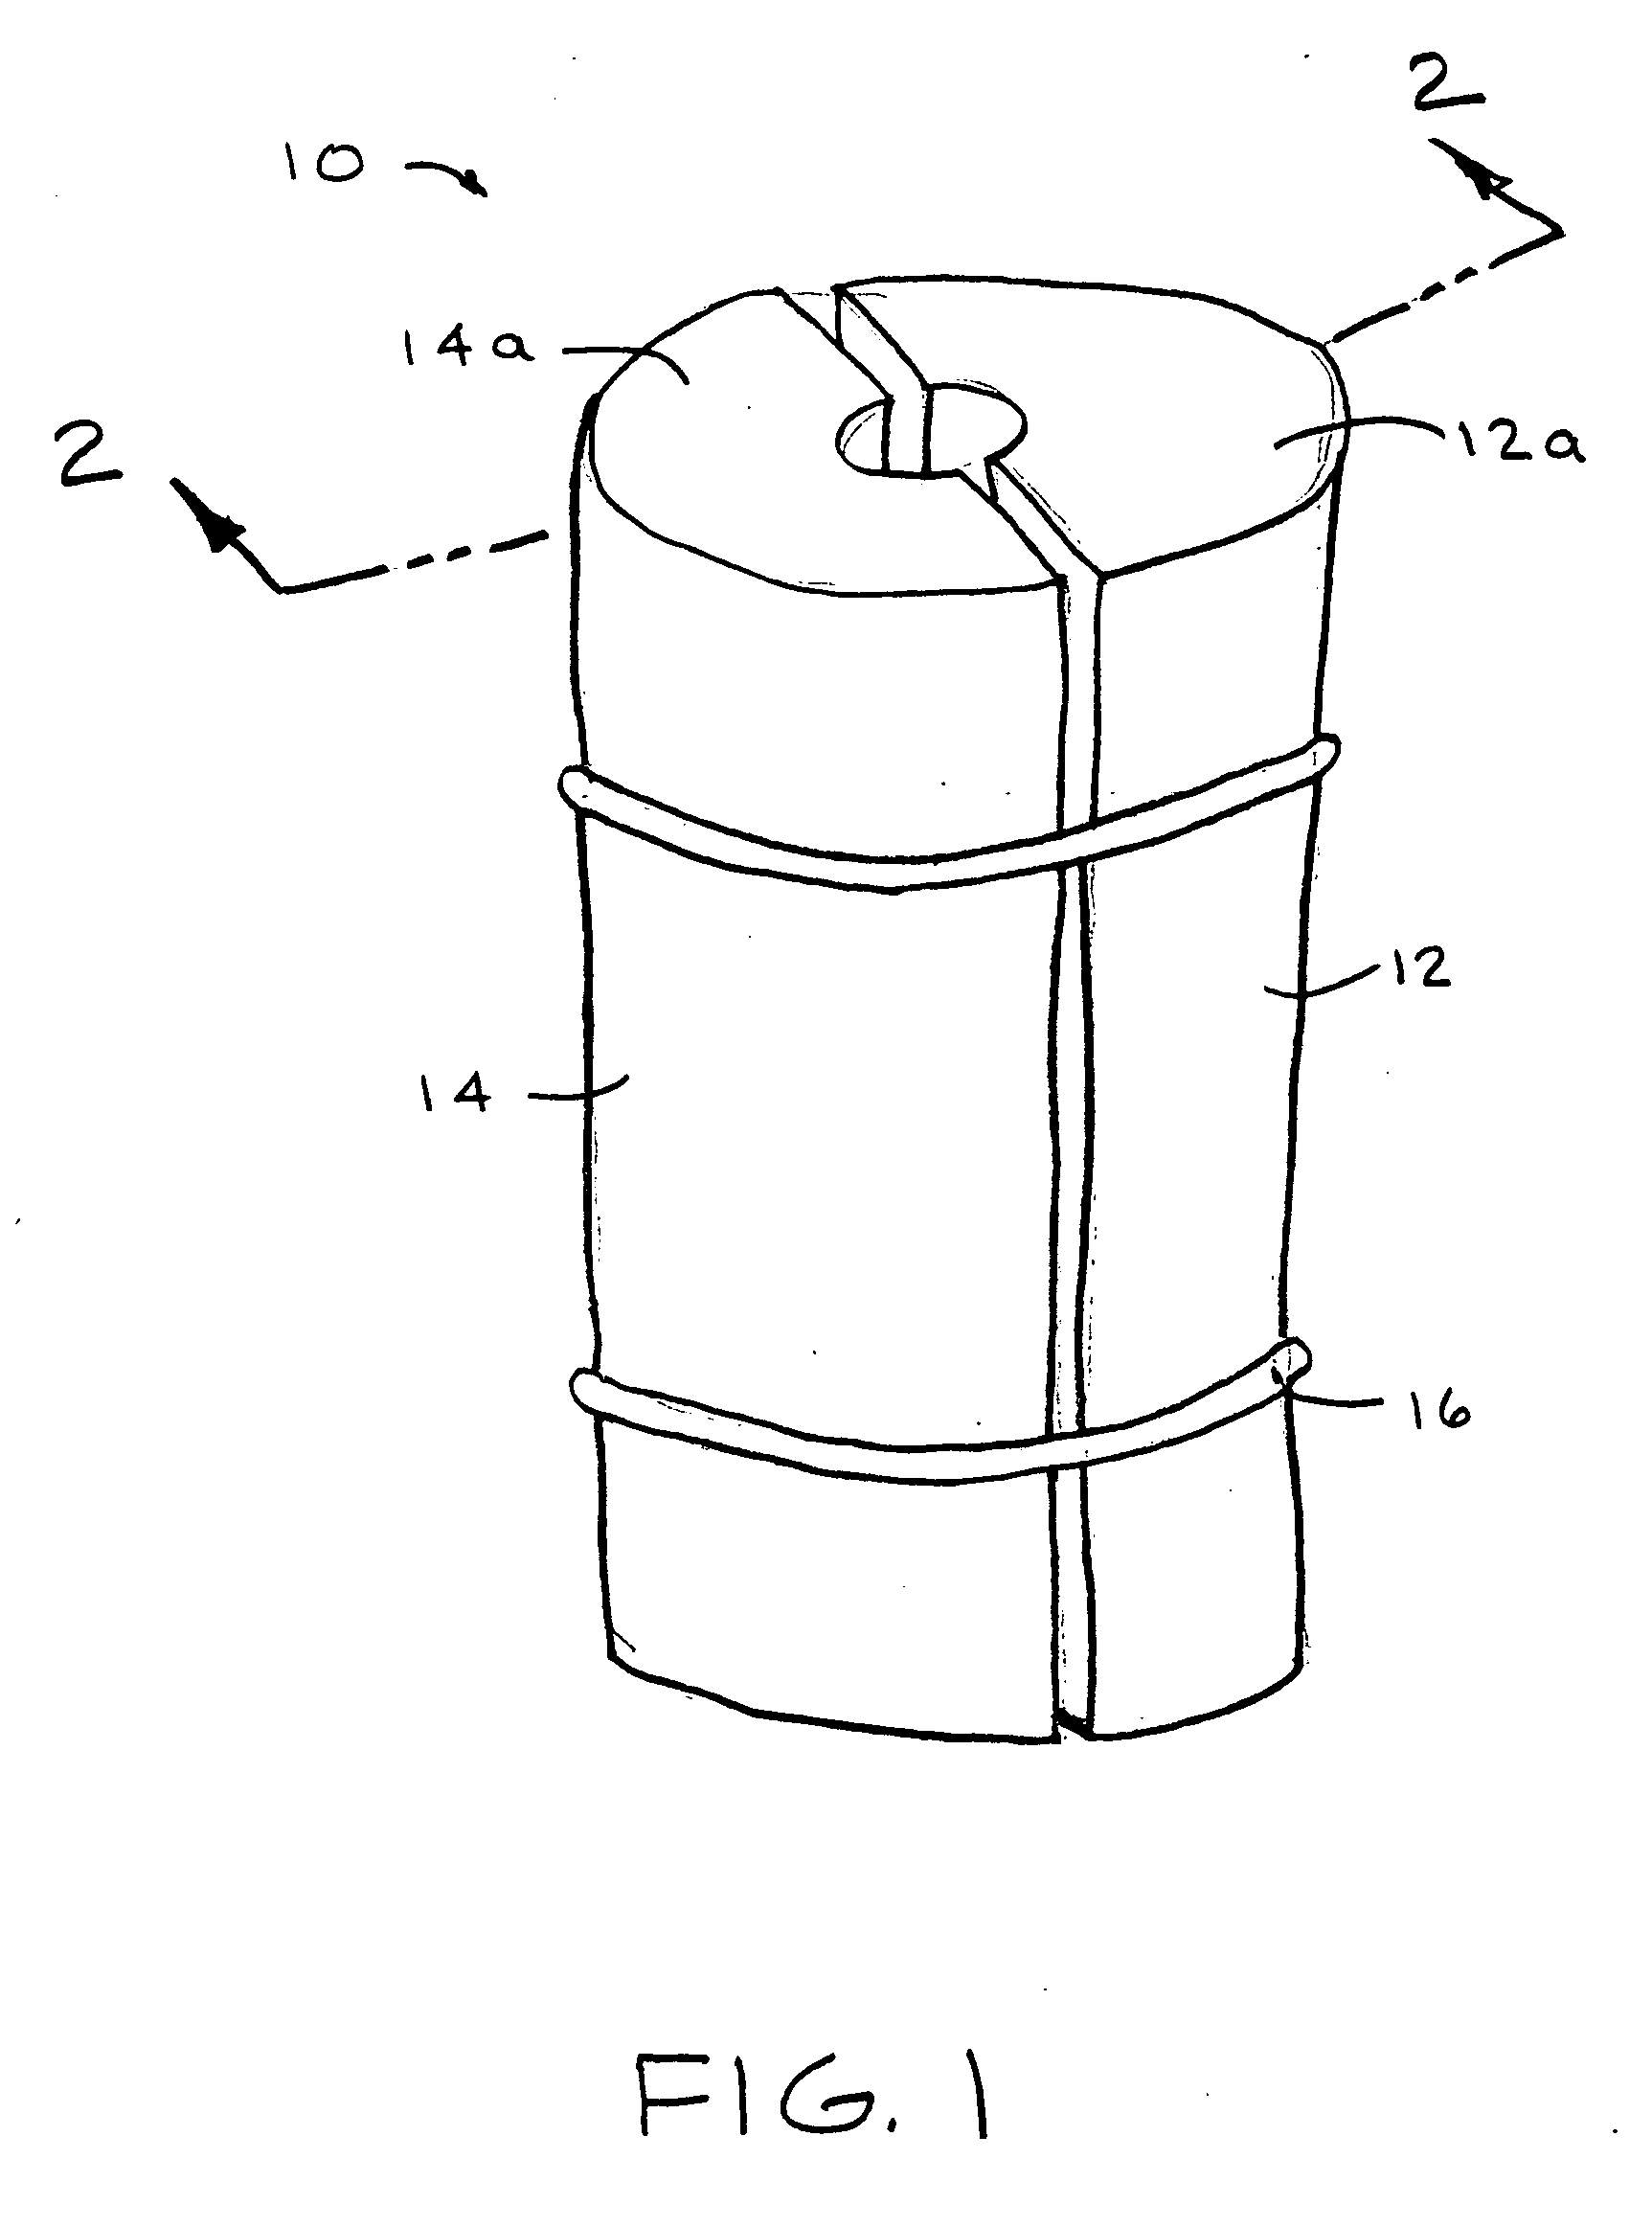 Concrete slab joint stabilizing system and apparatus